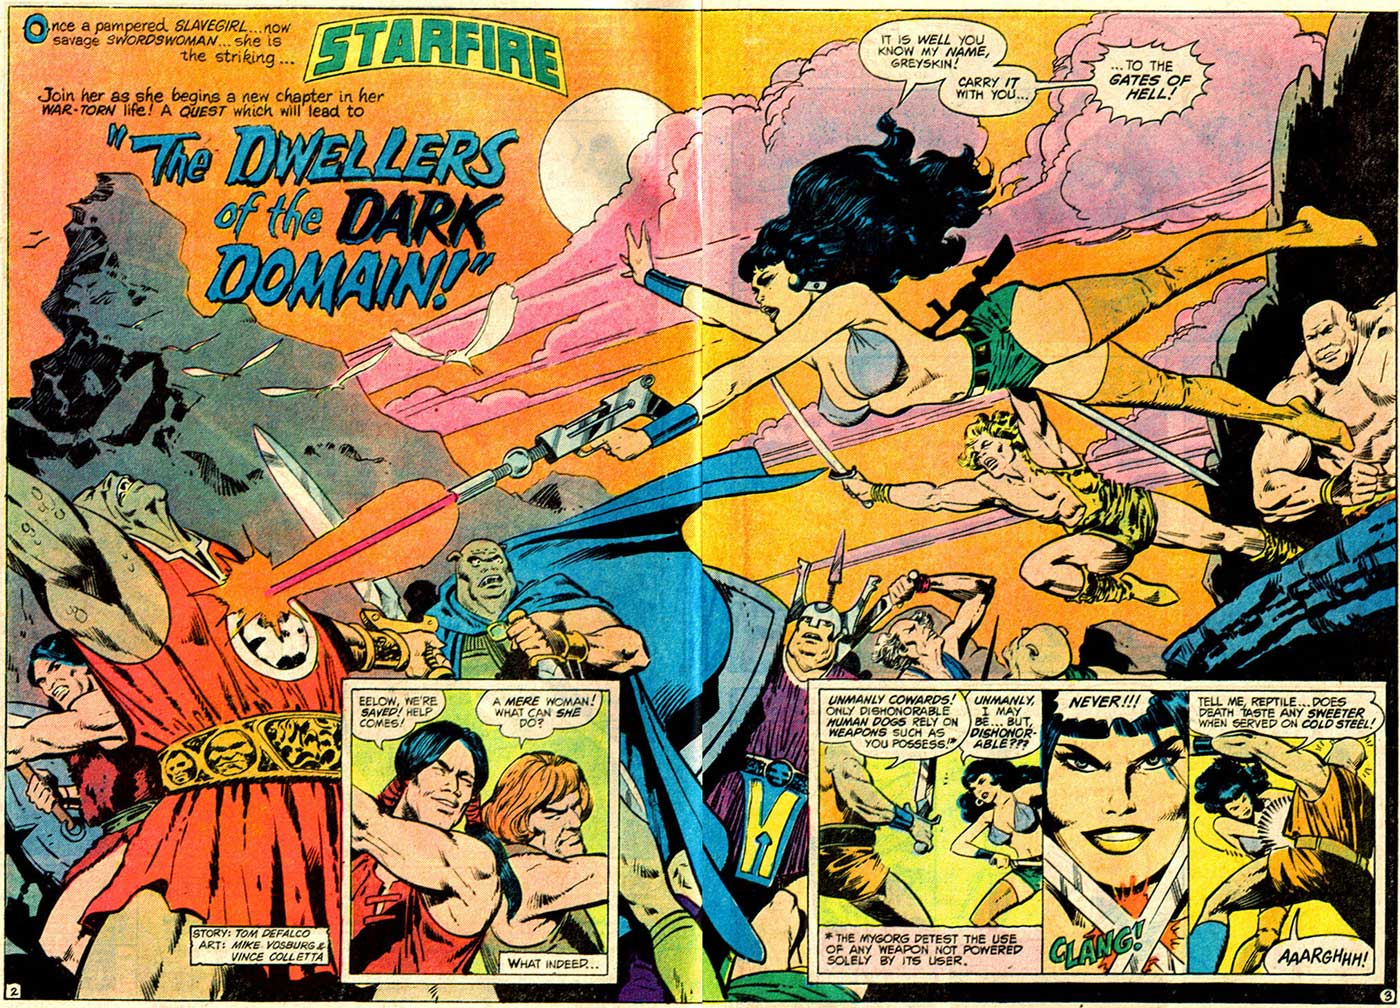 Starfire #8 by Tom DeFalco, Mike Vosburg, and Vince Colletta